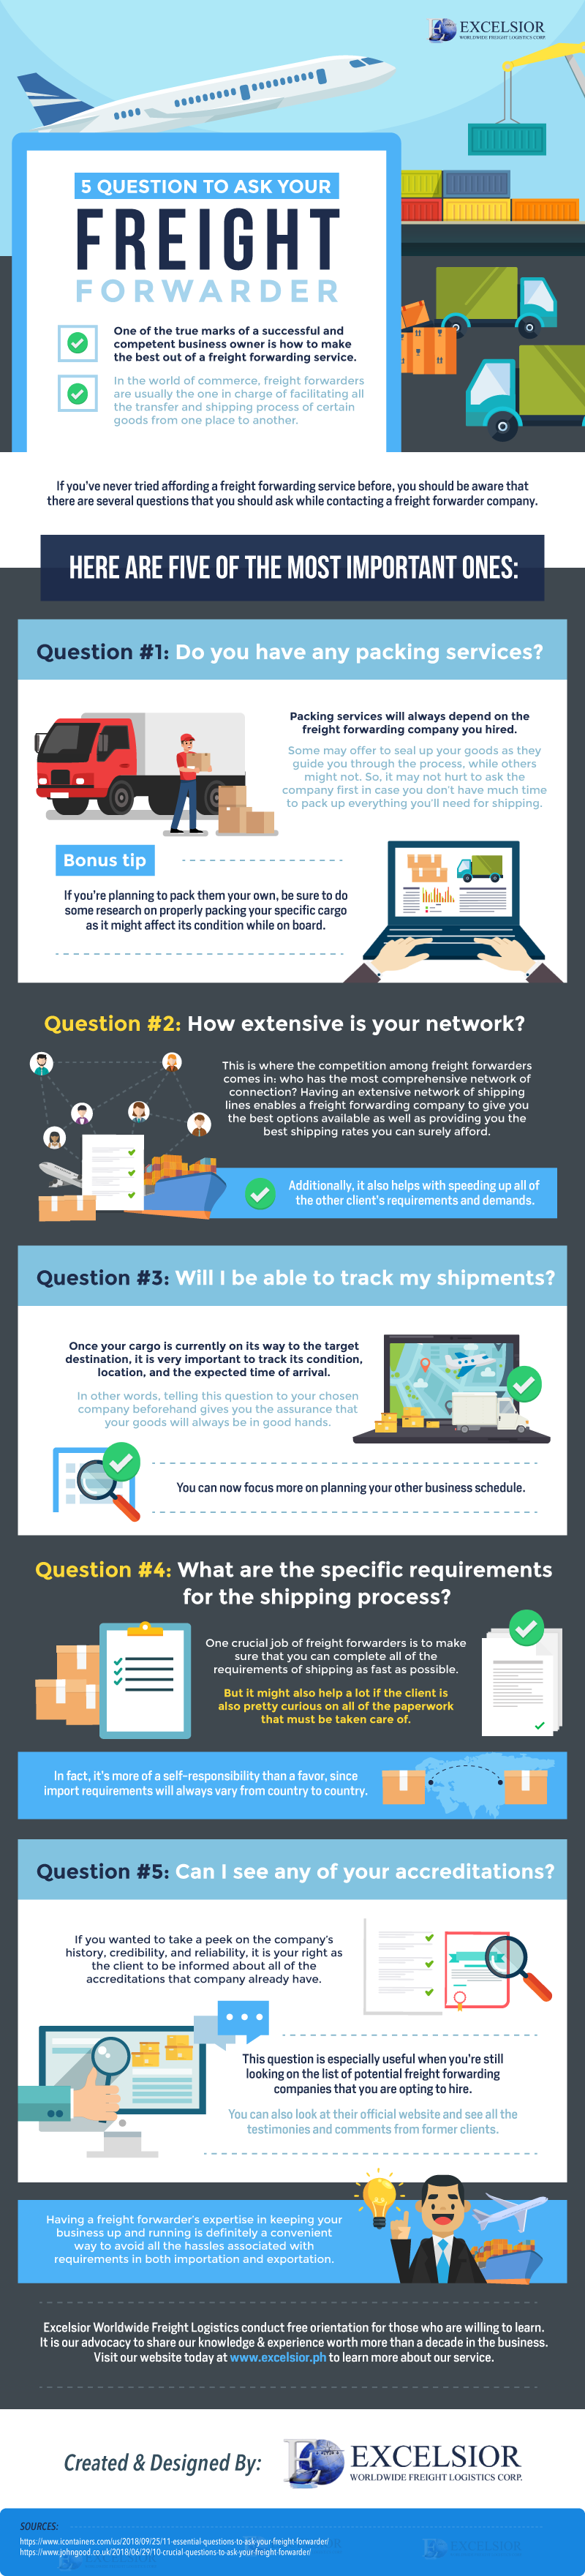 5 Questions to Ask your Freight Forwarder - Infographic